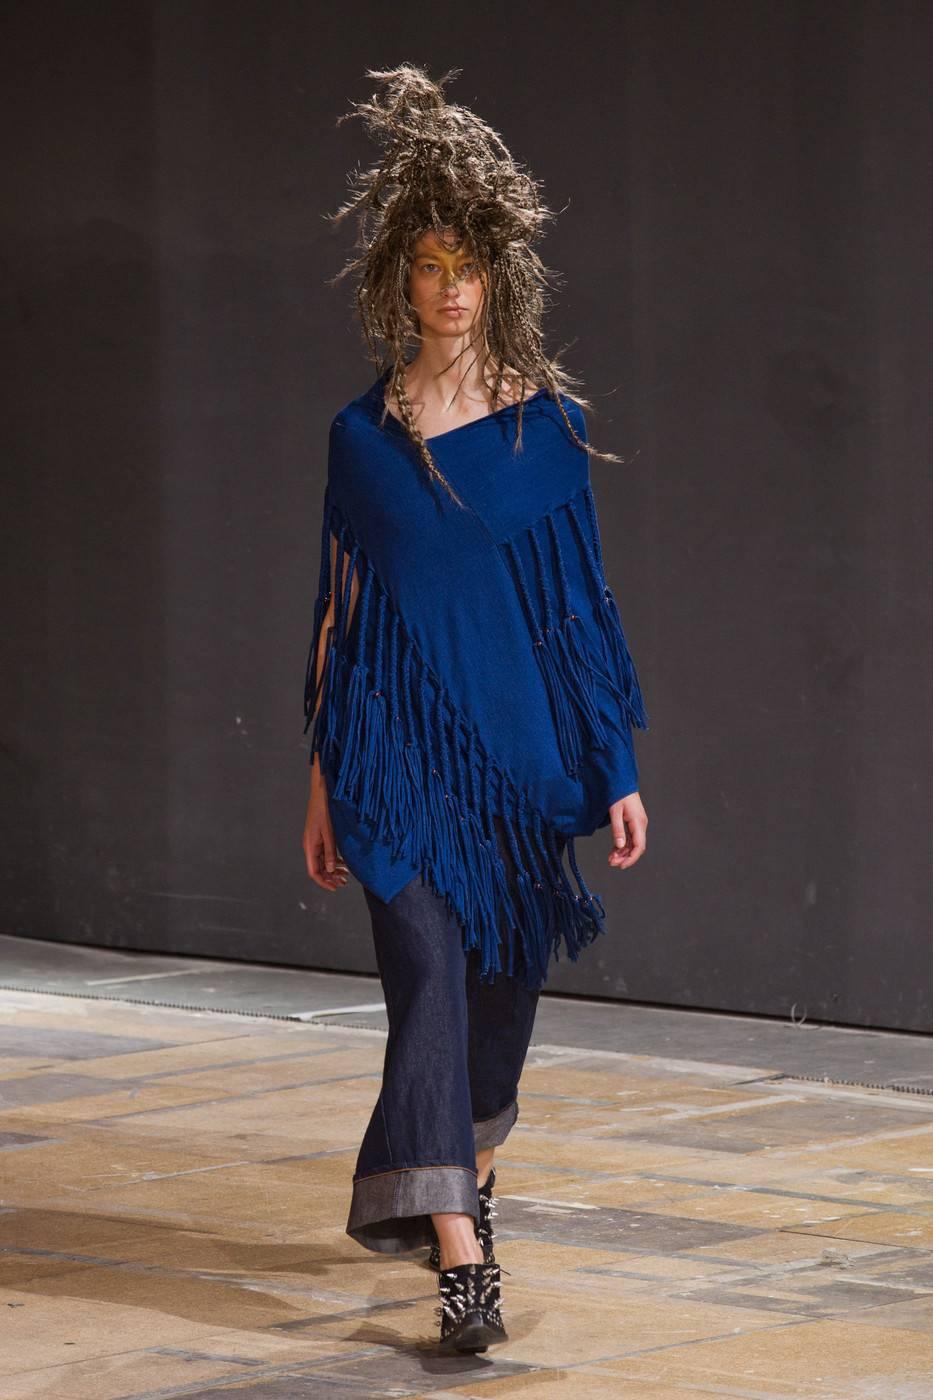 2014 Junya Watanabe blue  tassle knit top. ( see runway picture)
Size: Small, fit size : 2/4/6 small to medium